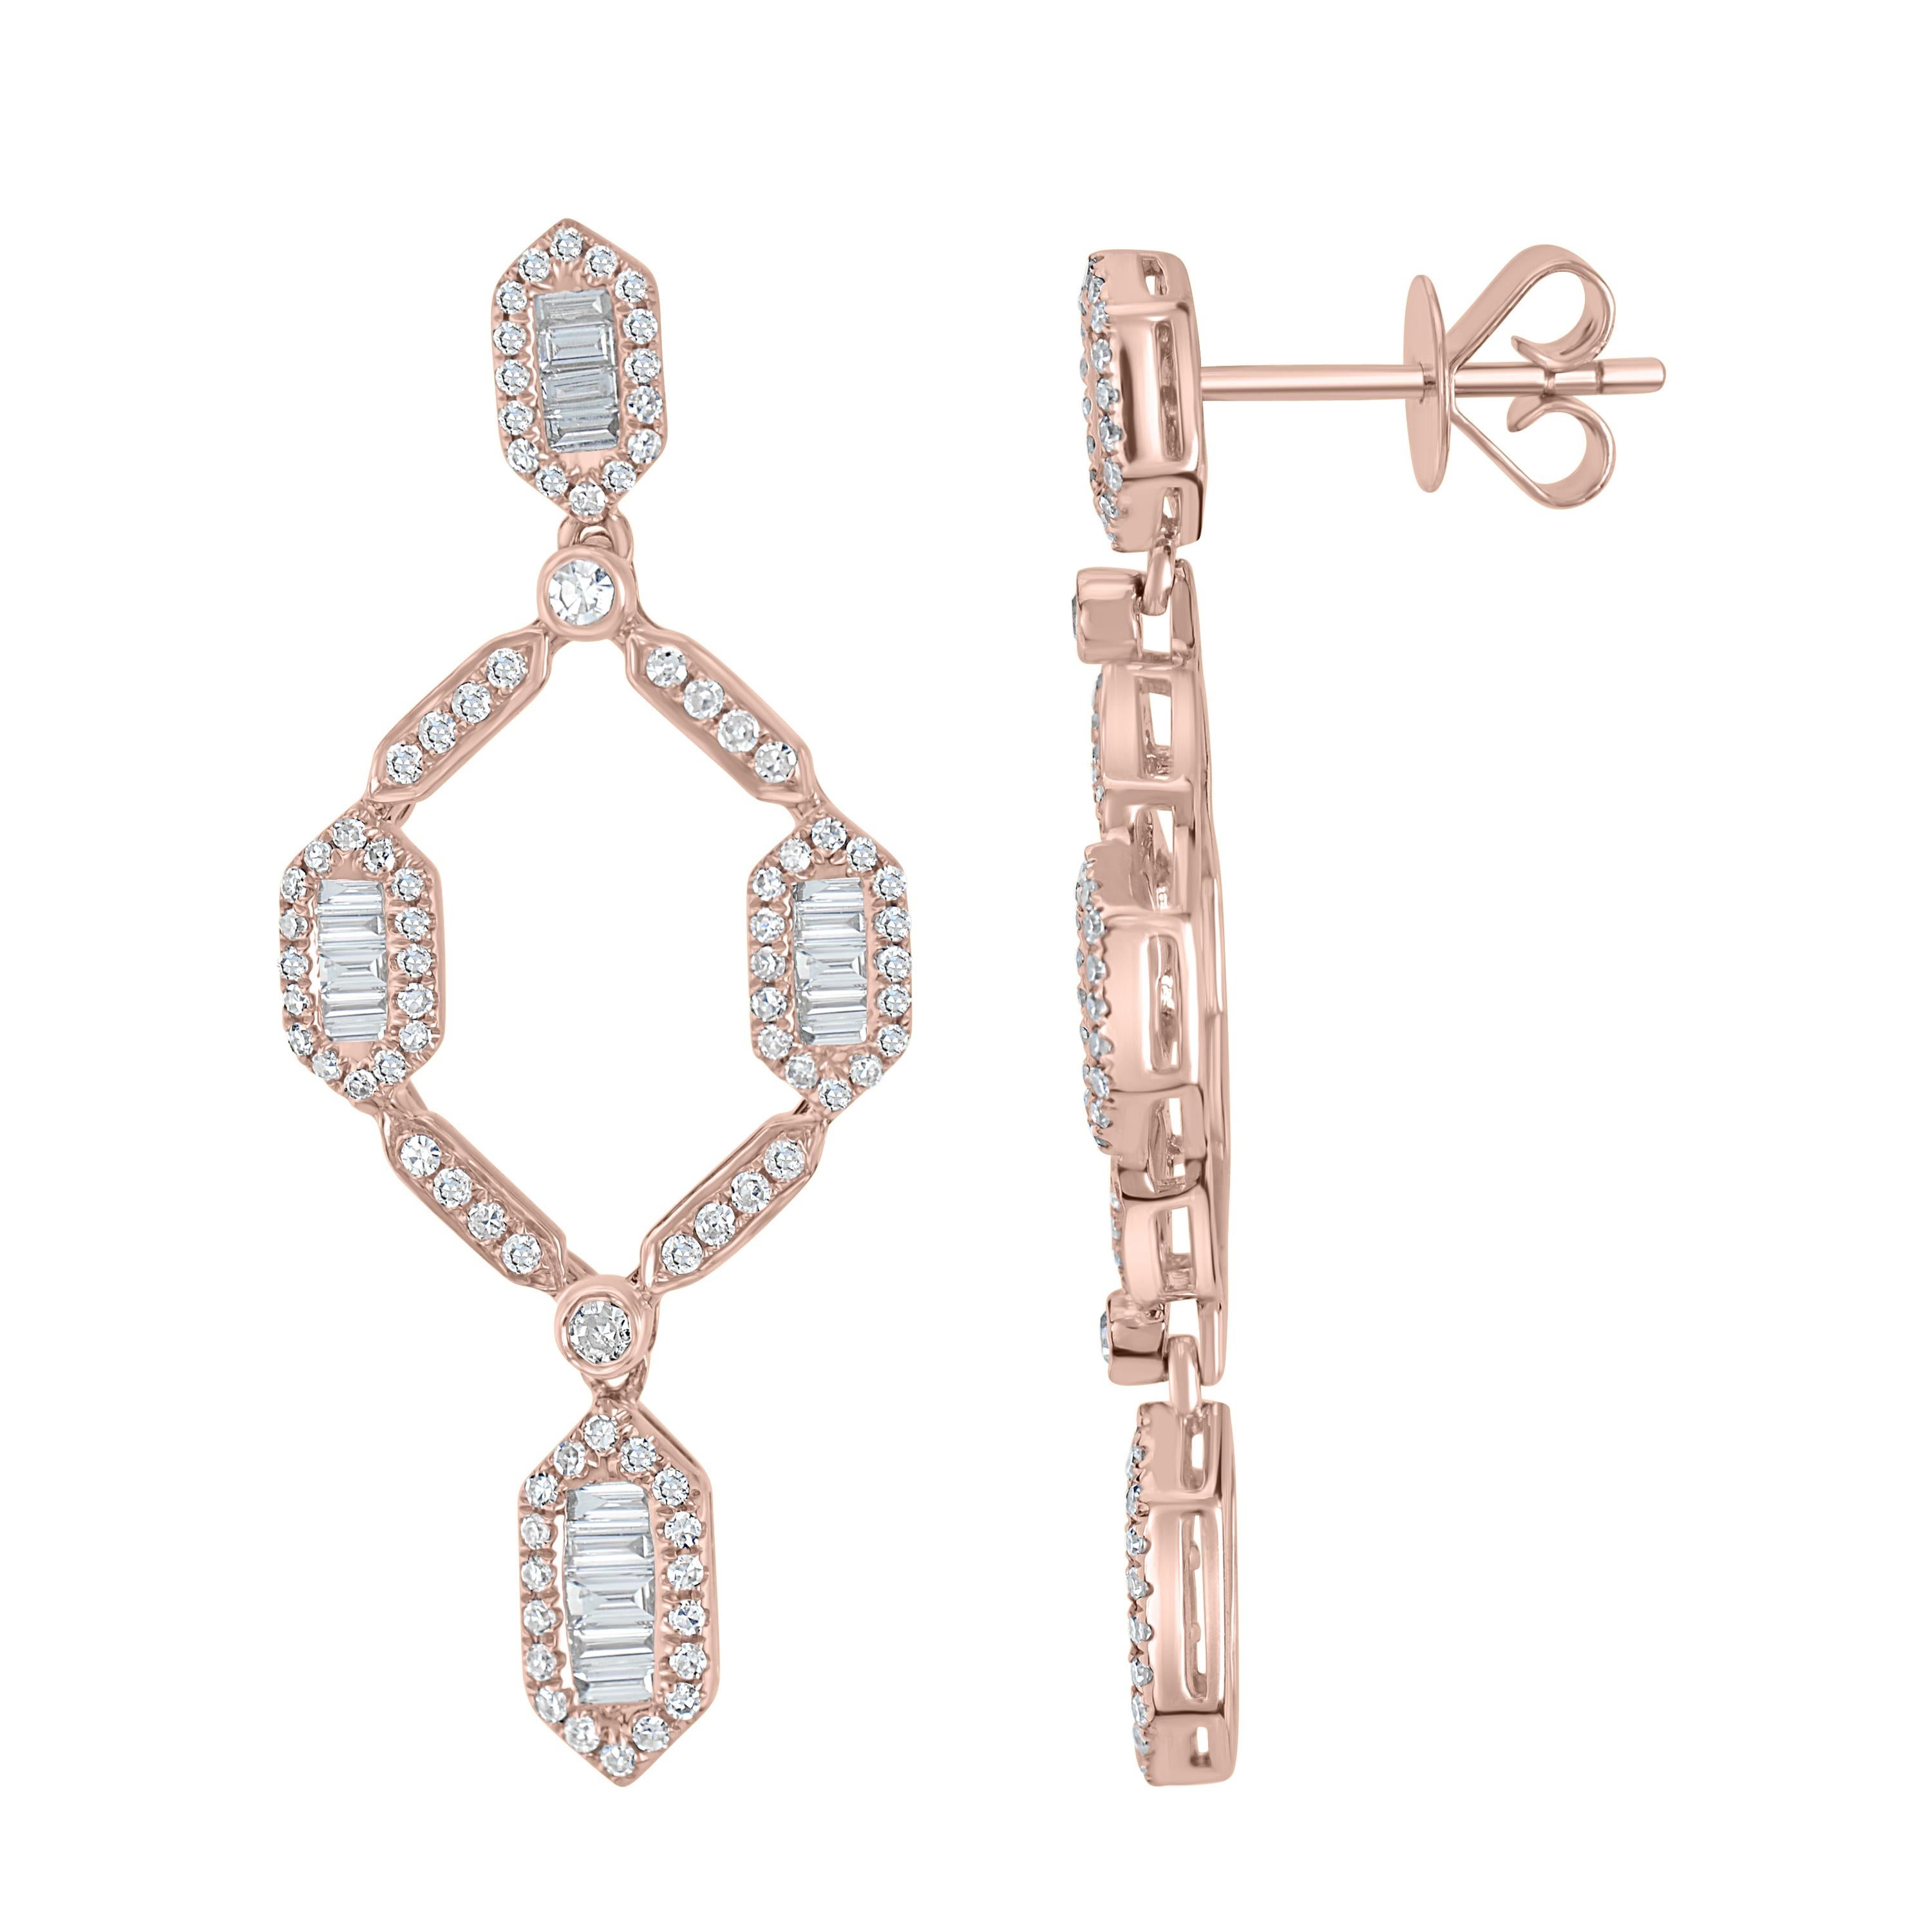 These Luxle Drop earrings are featured with smaller and larger diamonds embellished in an open frame design. Each pair consists of 34 baguette diamonds and 168 round diamonds on pave. These earrings come with gold posts and push-backs.

Please